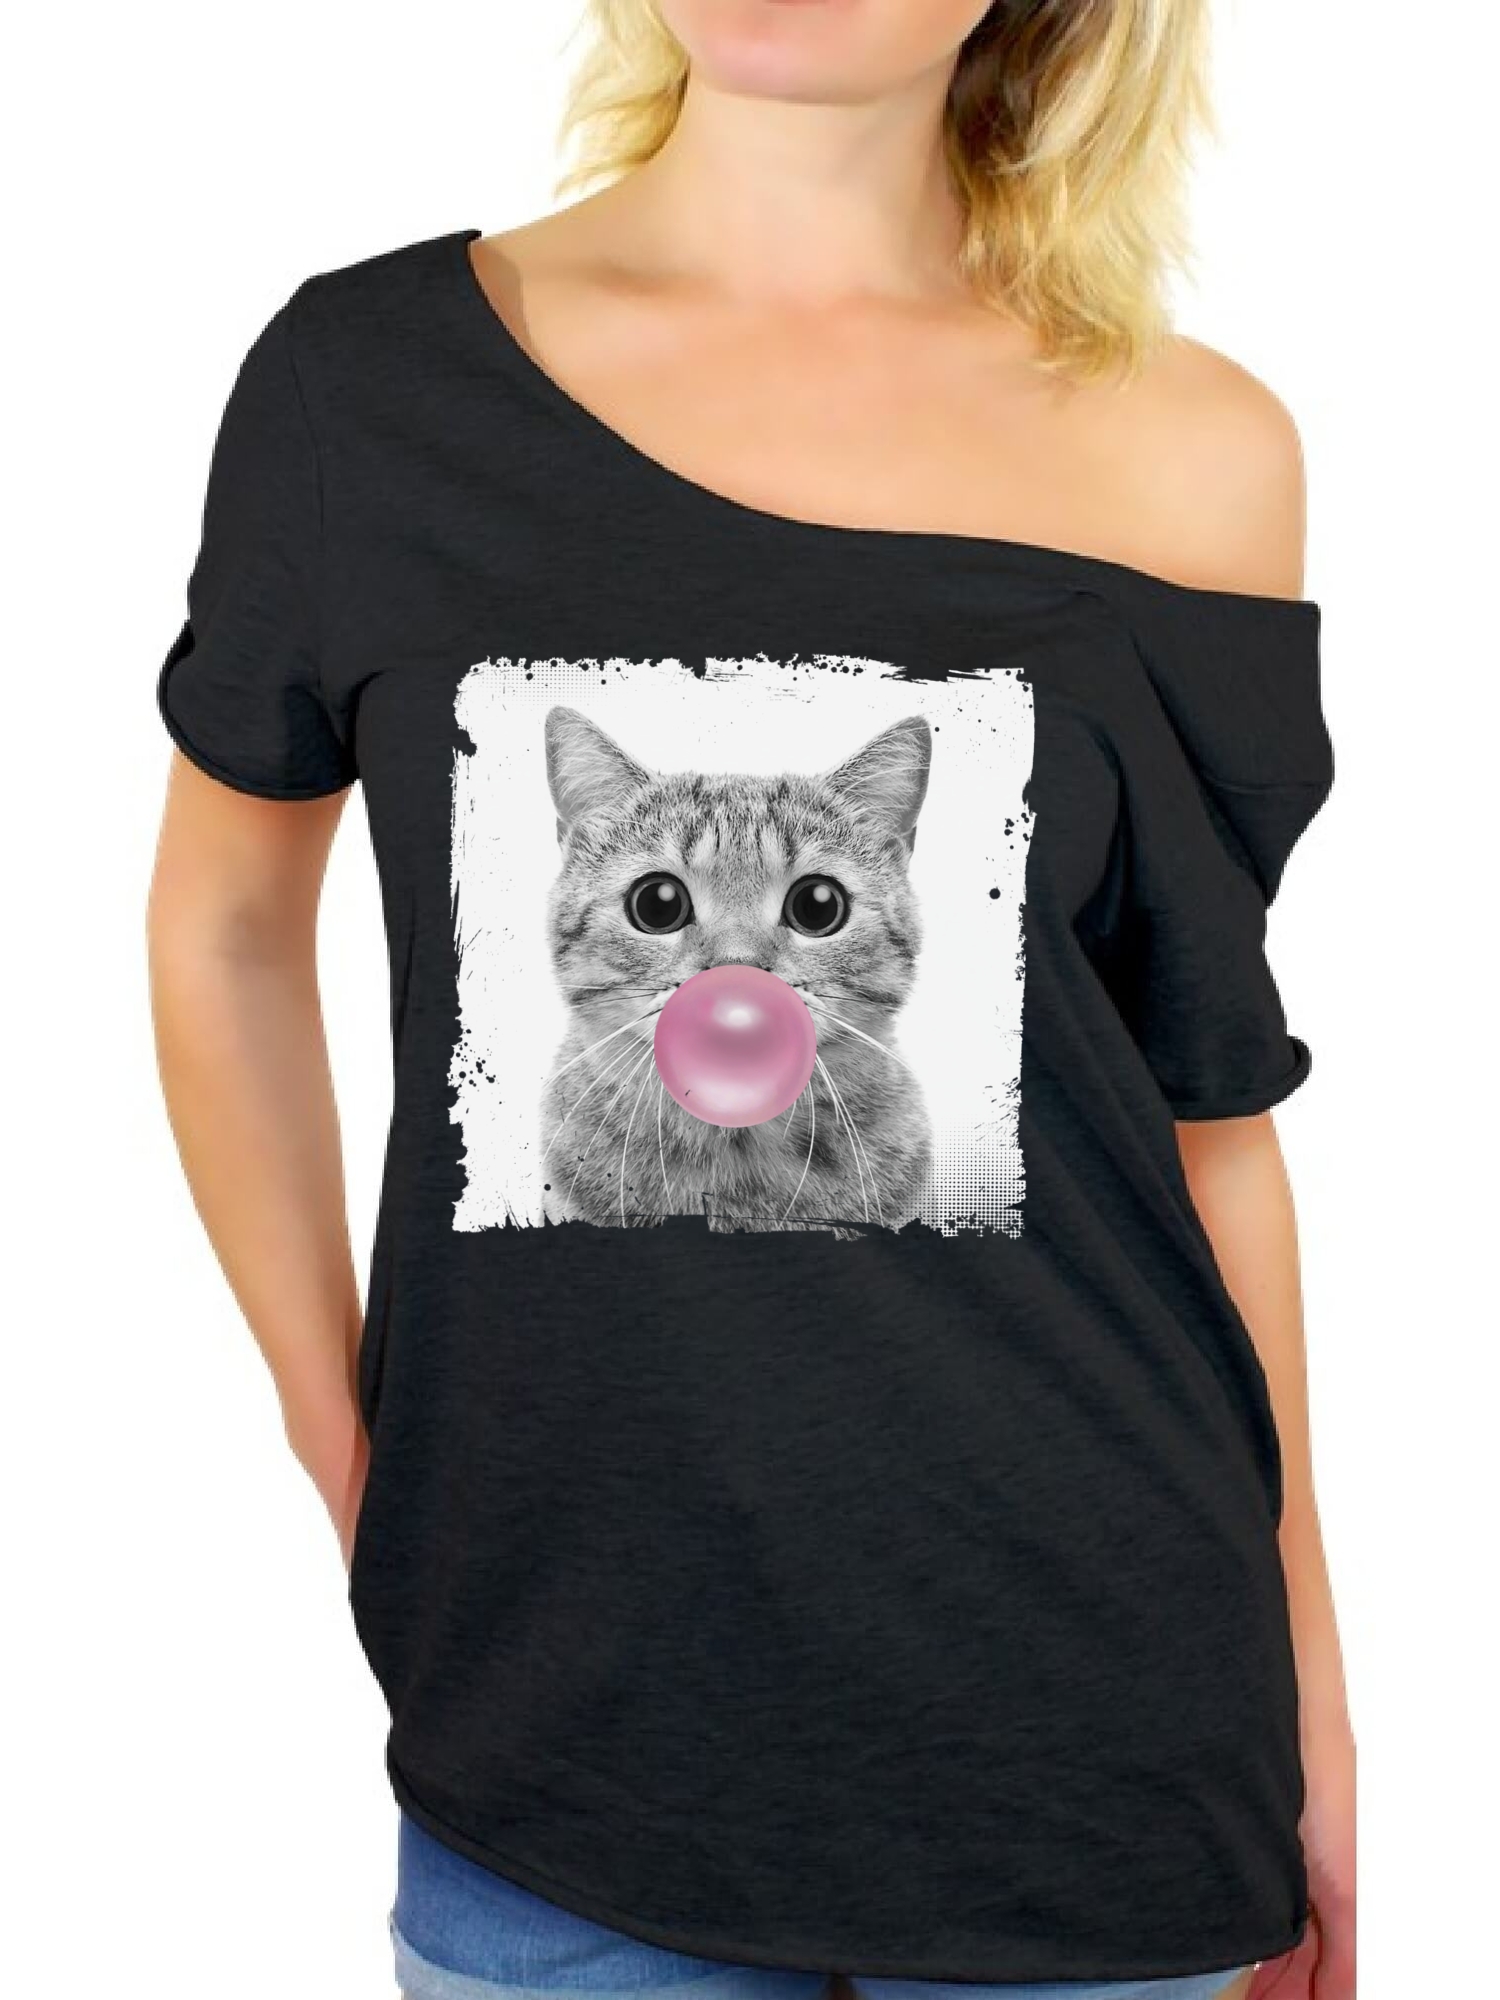 Awkward Styles Cute Ladies Off The Shoulder Shirt Women T Shirt Women Clothes Cat with Gum Off The Shoulder Shirt Animal T-Shirt for Woman Funny Animal Gifts Cat Clothing Cat T Shirt Cute Shirt - image 1 of 4